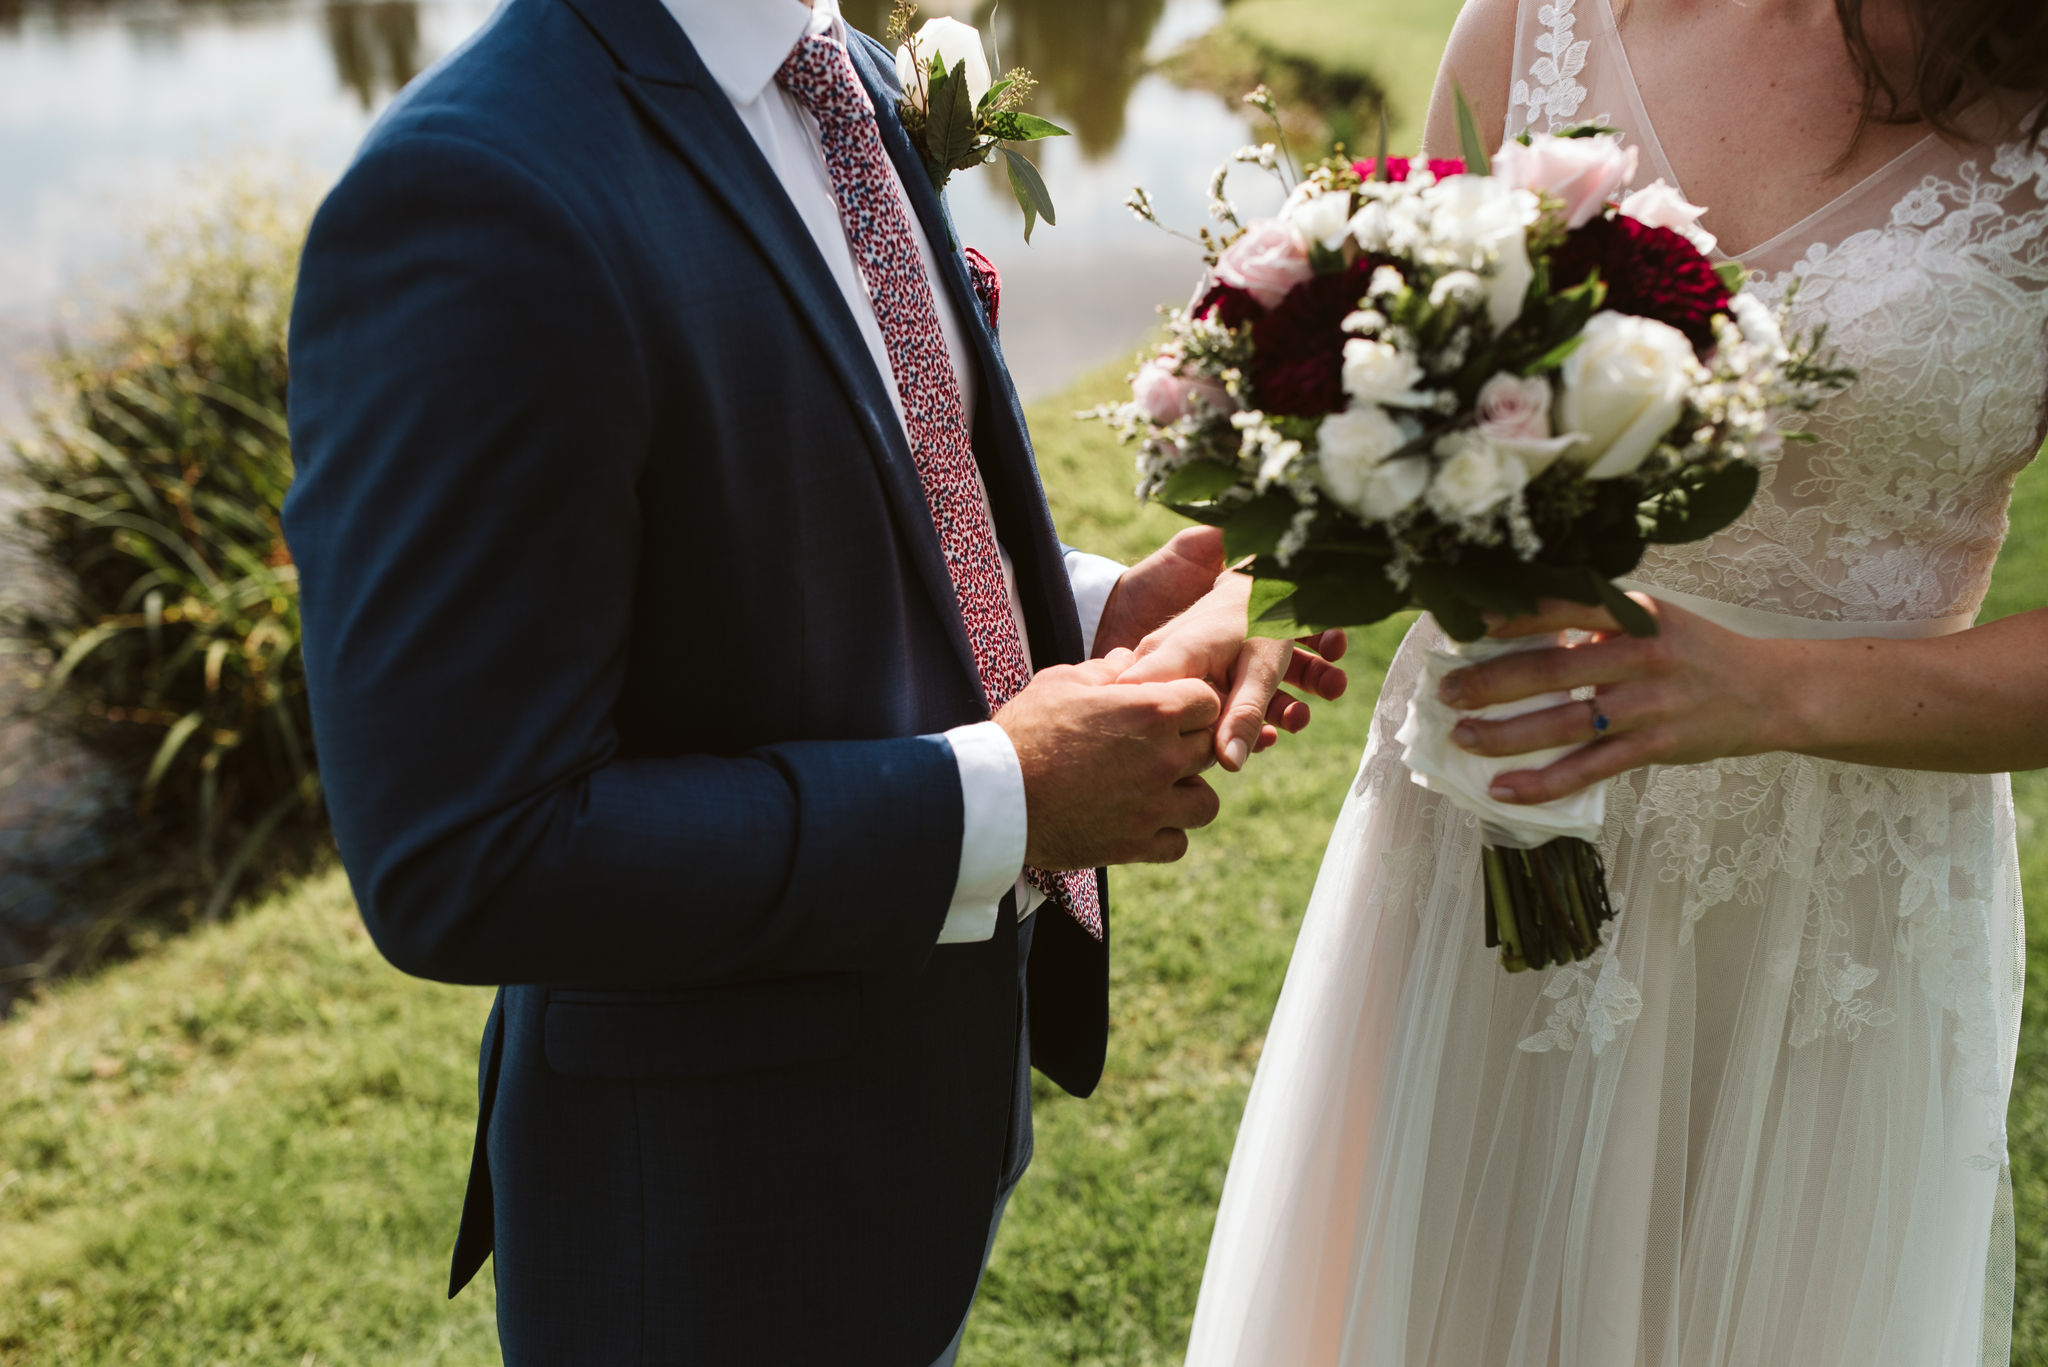  Phoenix Maryland, Baltimore Wedding Photographer, Eagle’s Nest Country Club, Classic, Romantic, Spring, Bride and Groom Holidng Hands after First Look, Dundalk Florist, Knotty Tie, Generation Tux 